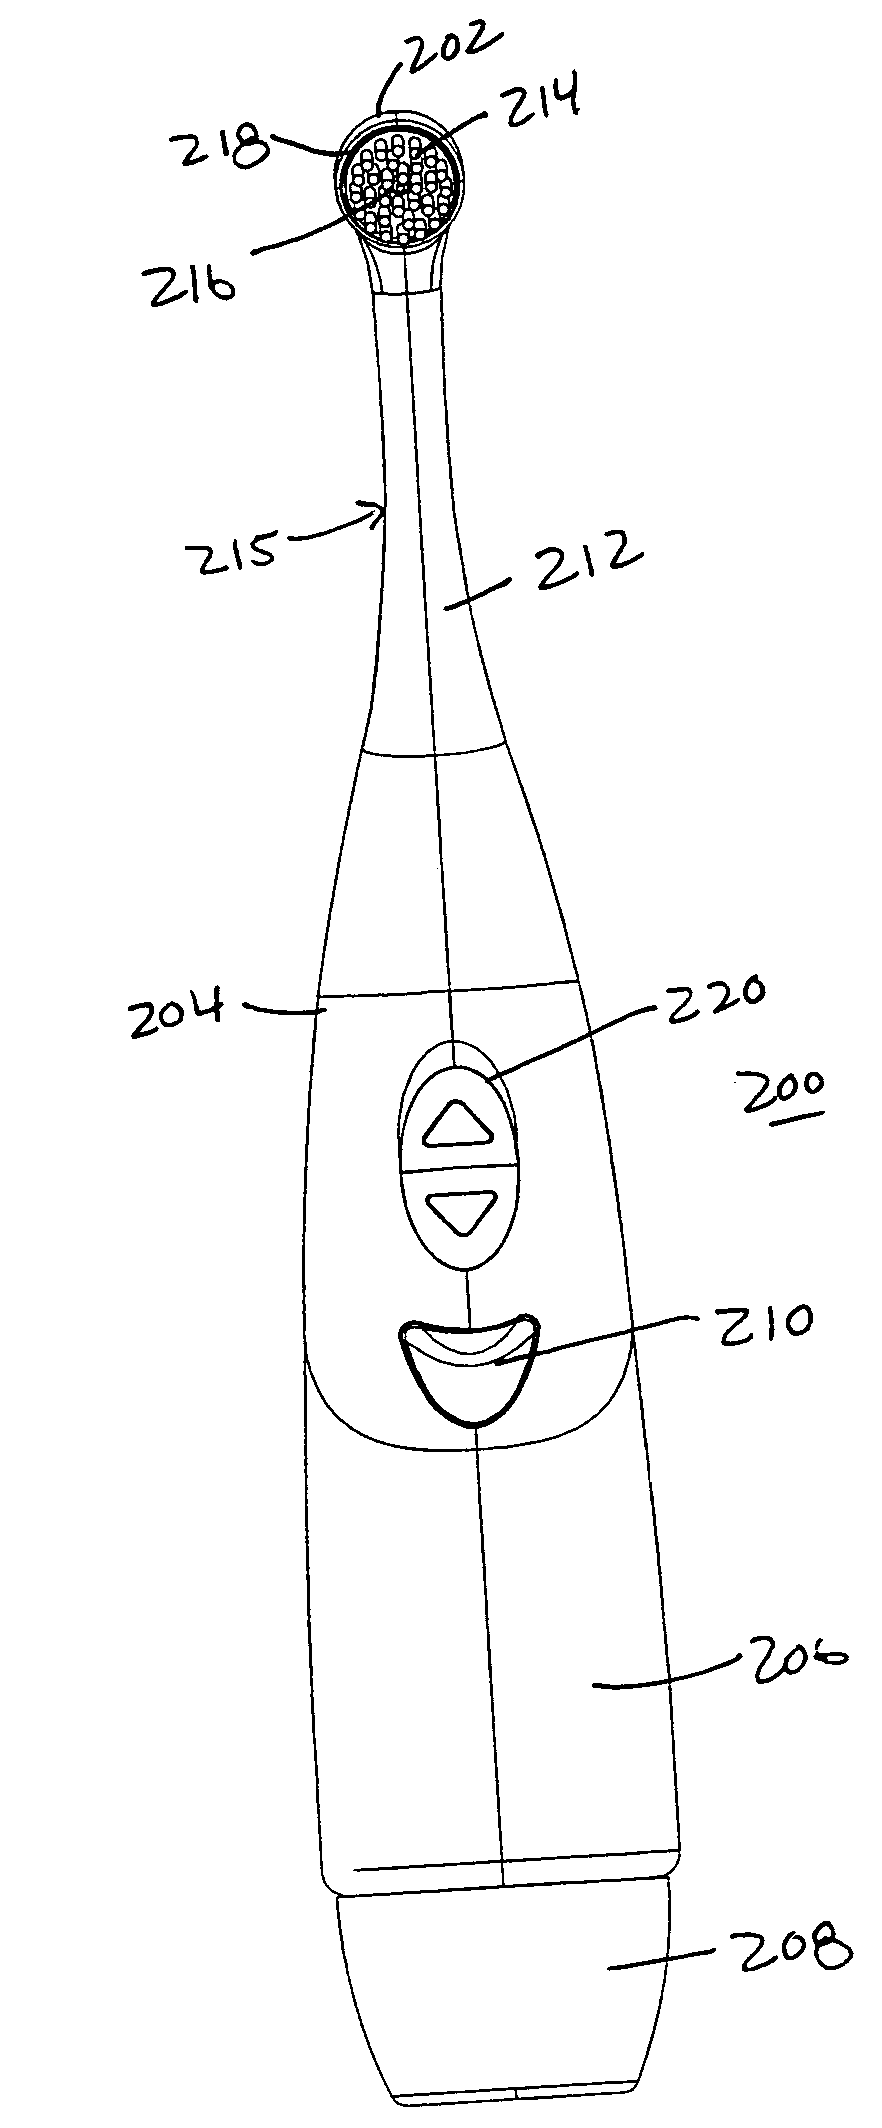 Self-contained oral cleaning device